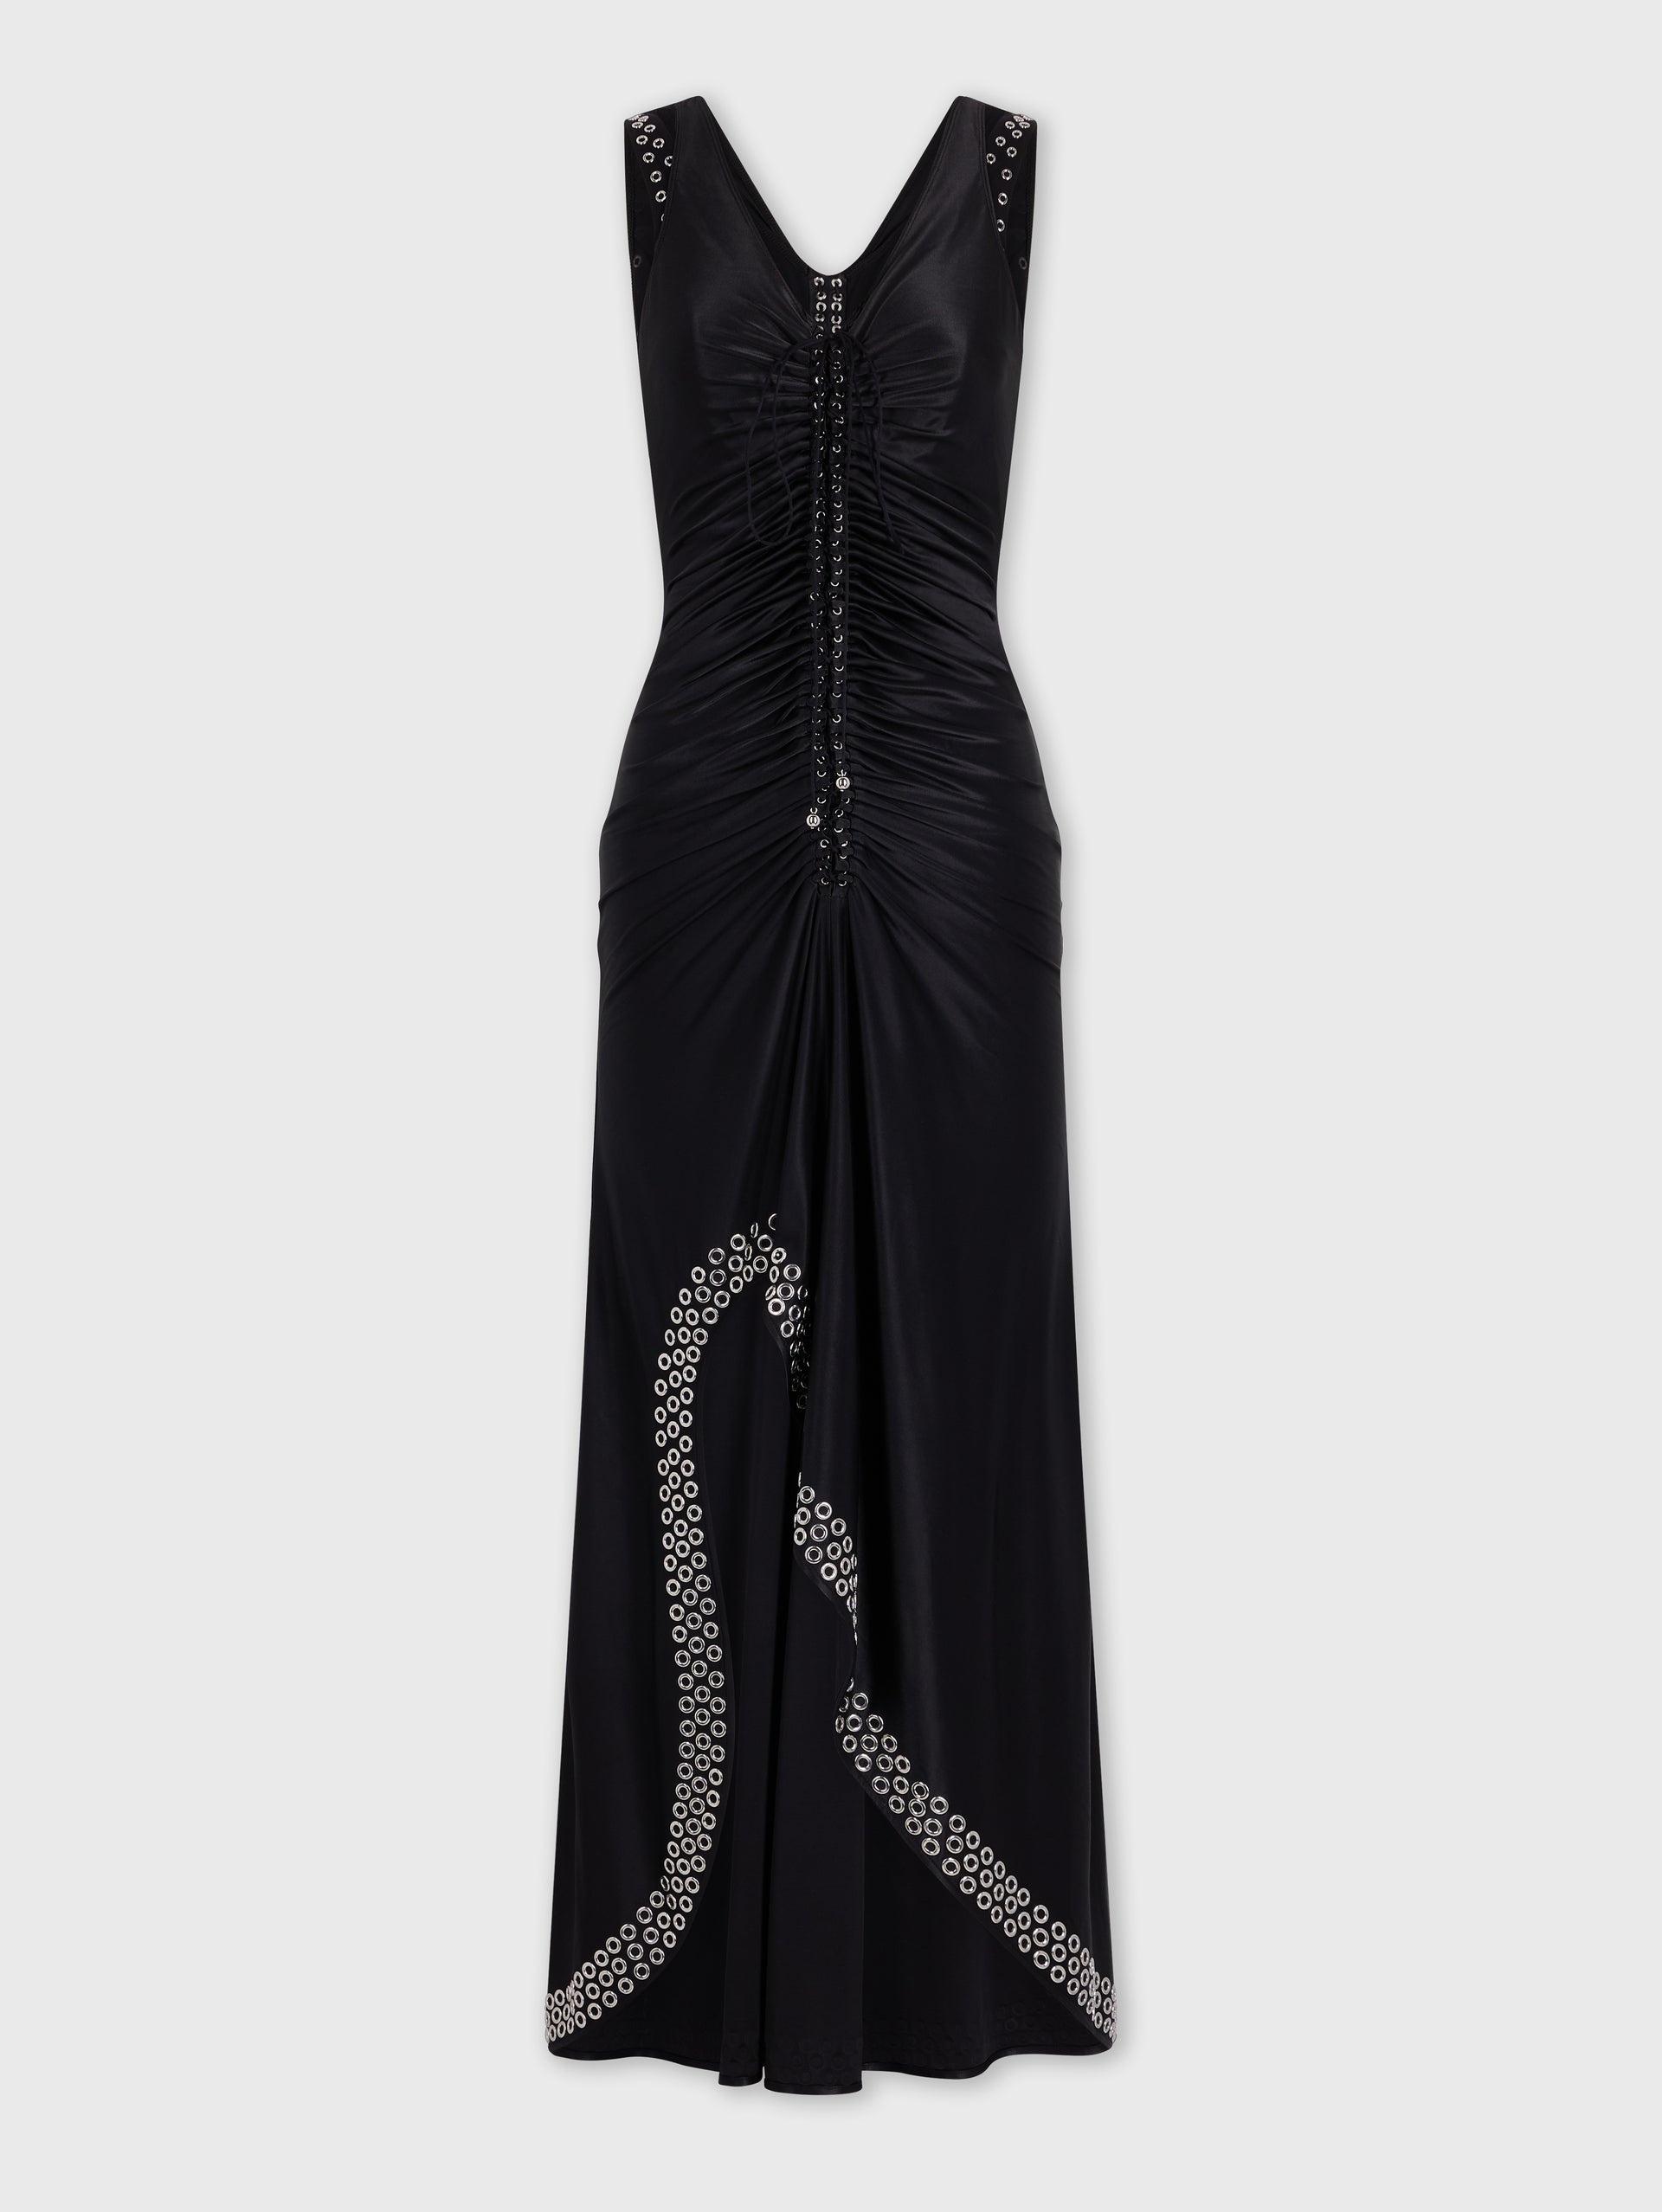 LONG BLACK DRESS WITH EMBROIDERED METALLIC EYELETS - 1